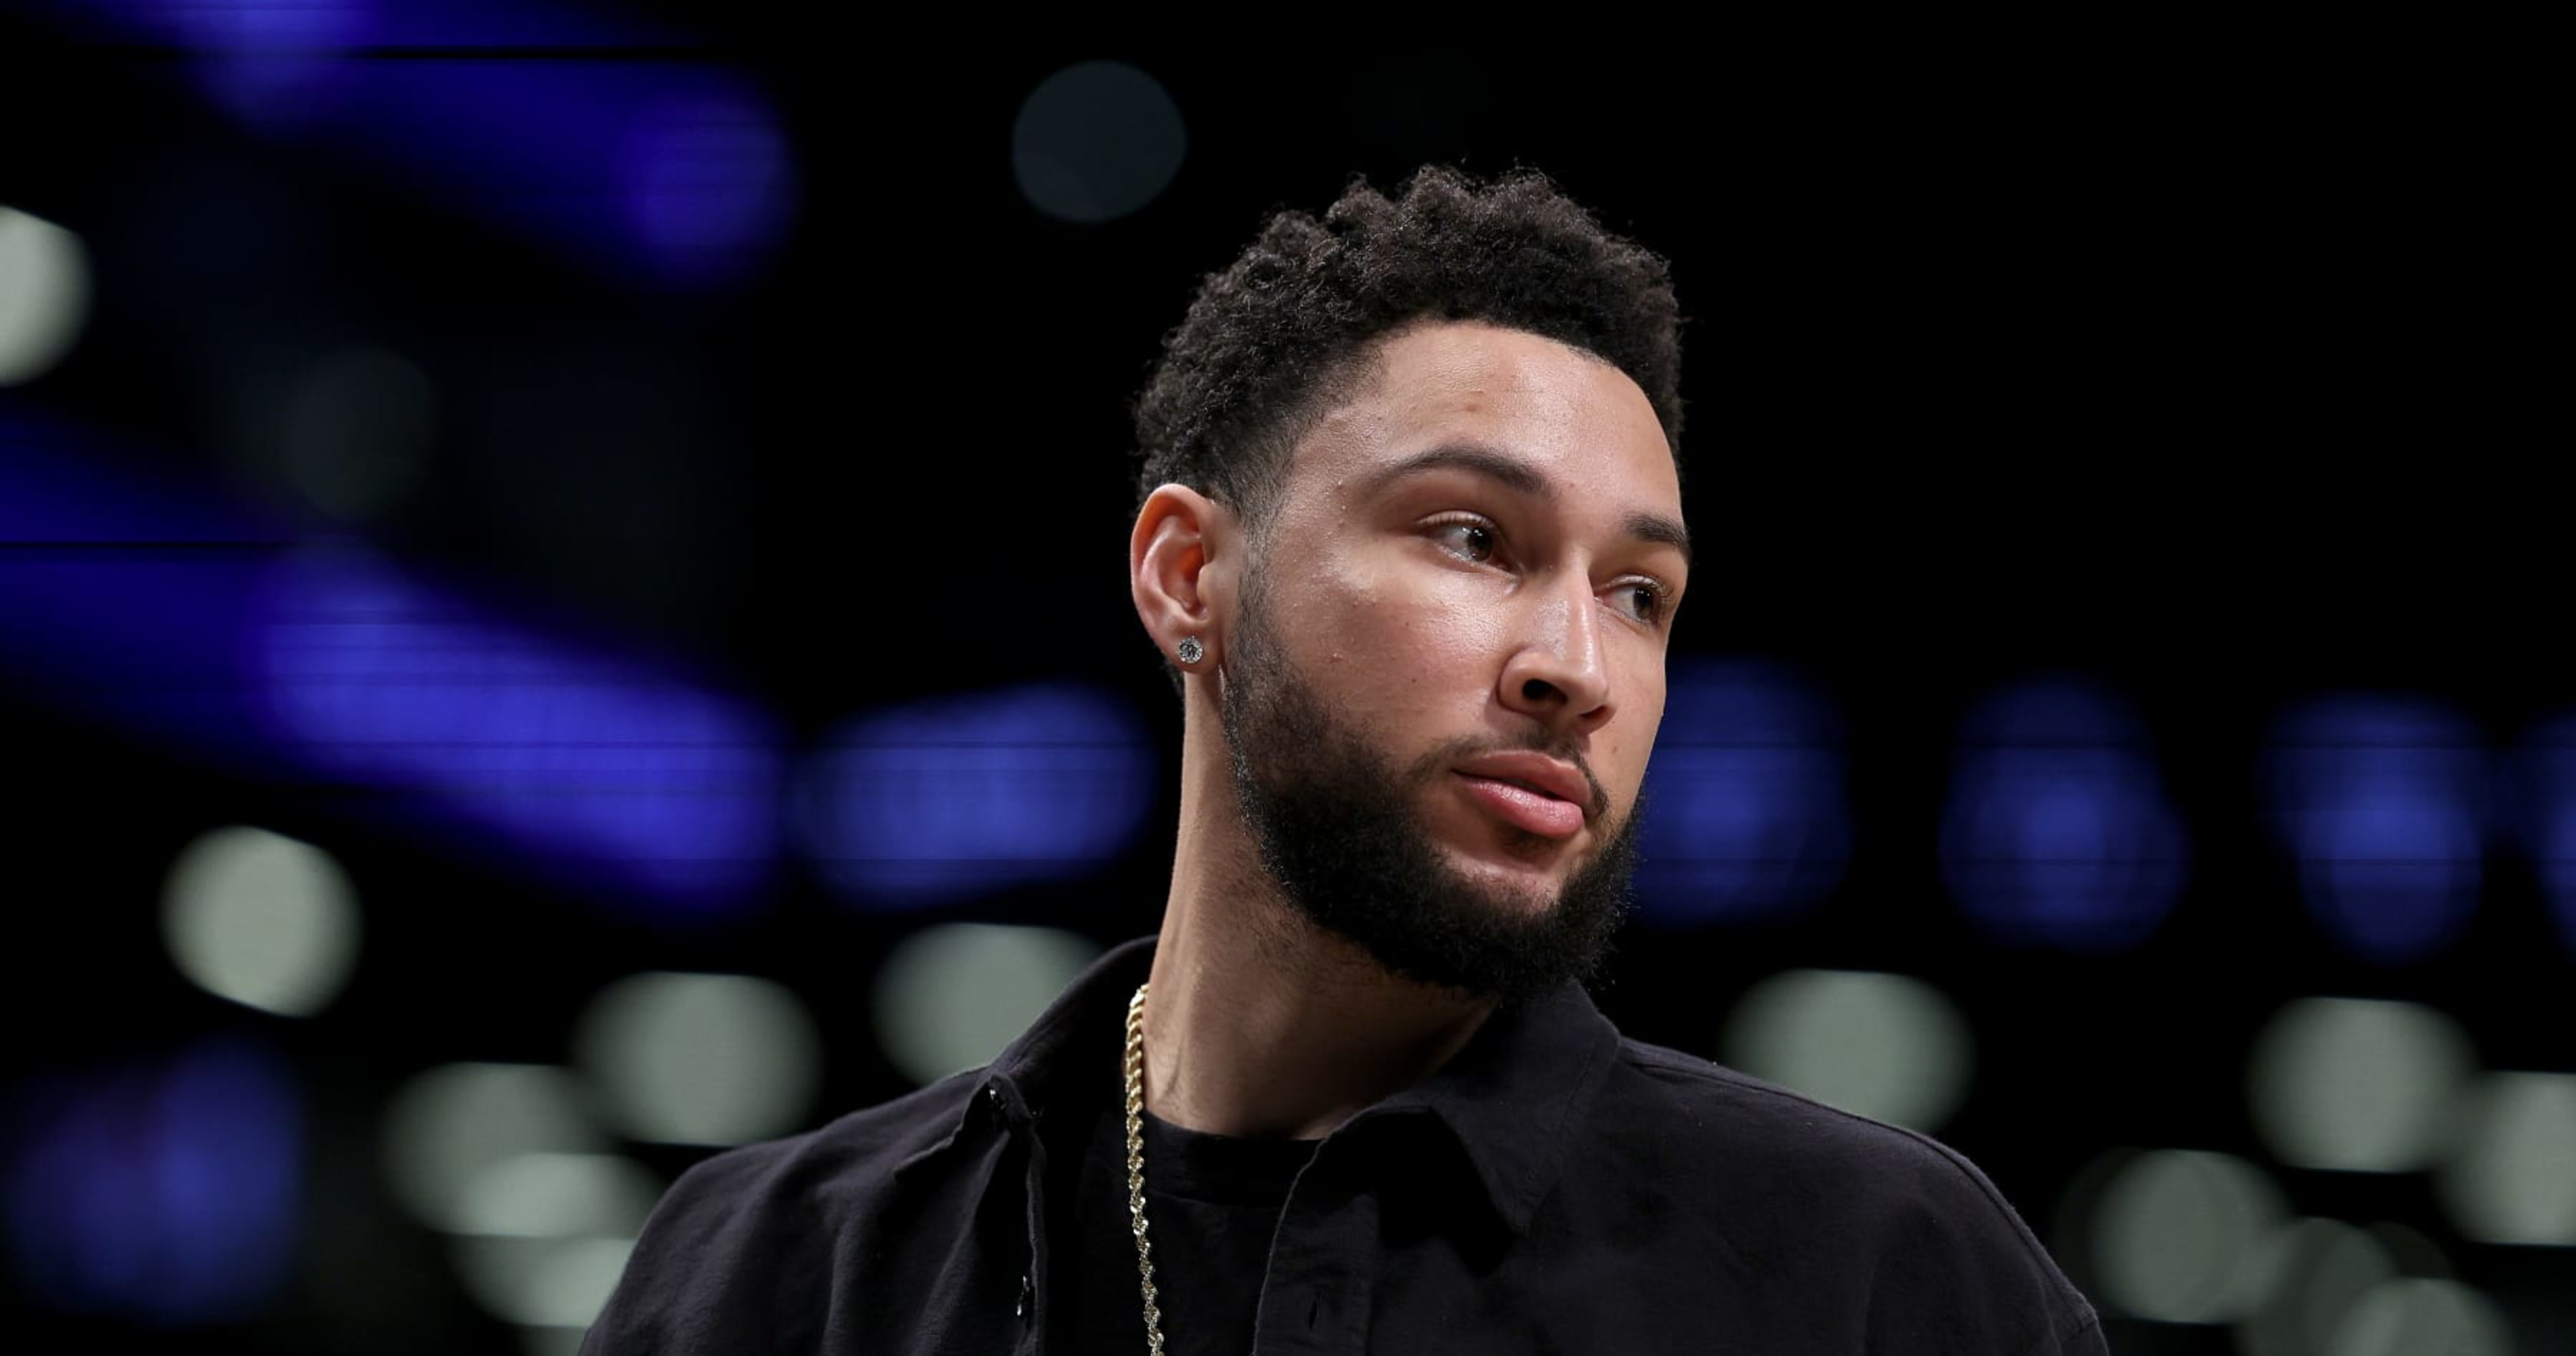 Ben Simmons Fanpage! on Instagram: “The @sixers were training and